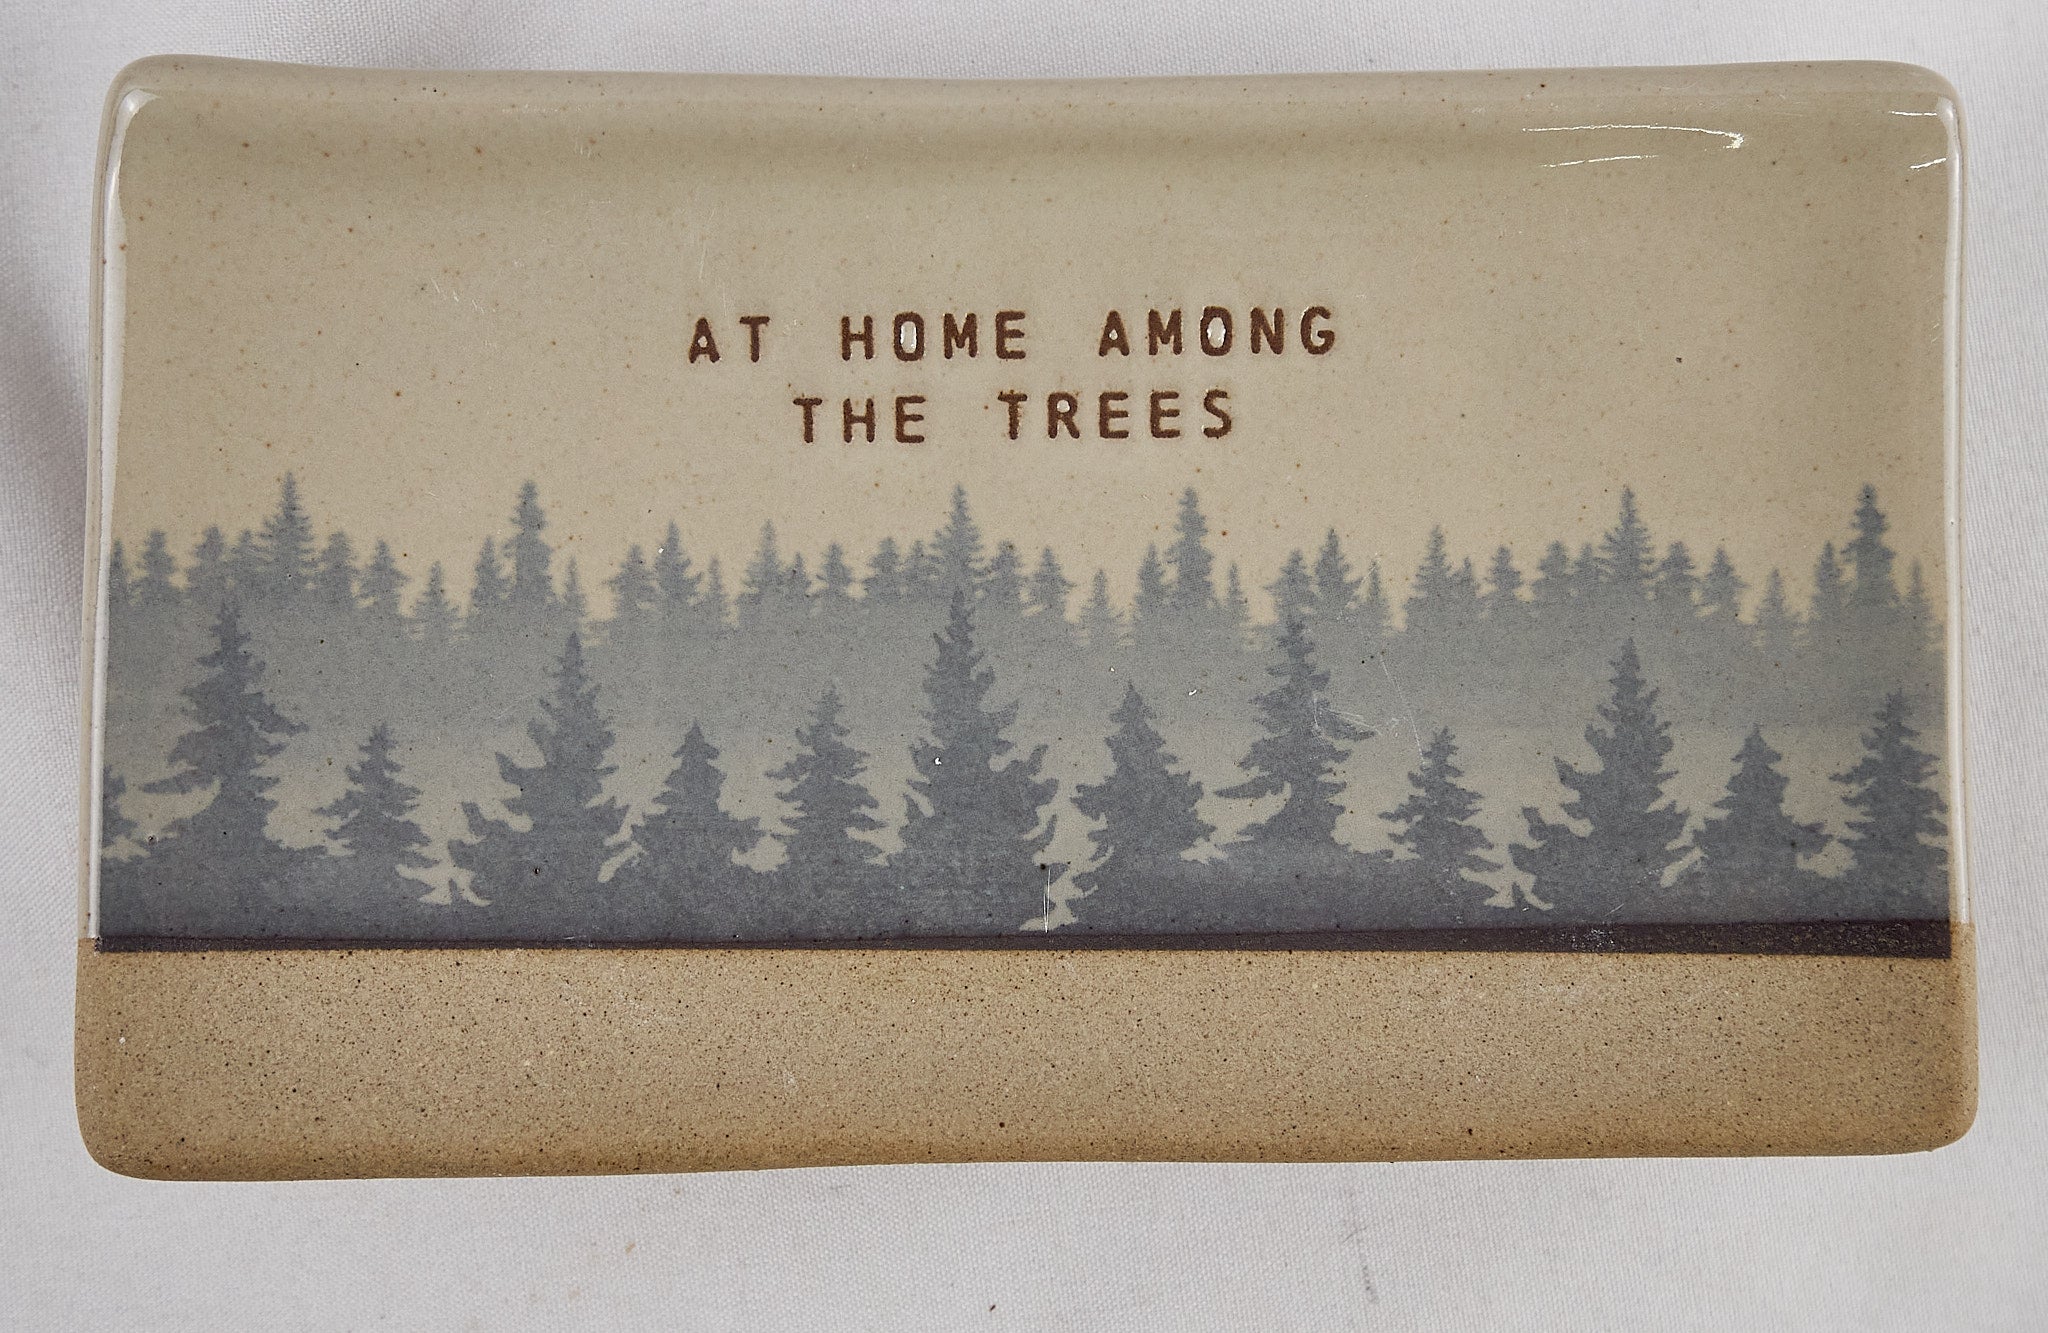 At Home Among the Trees Spoon Rest